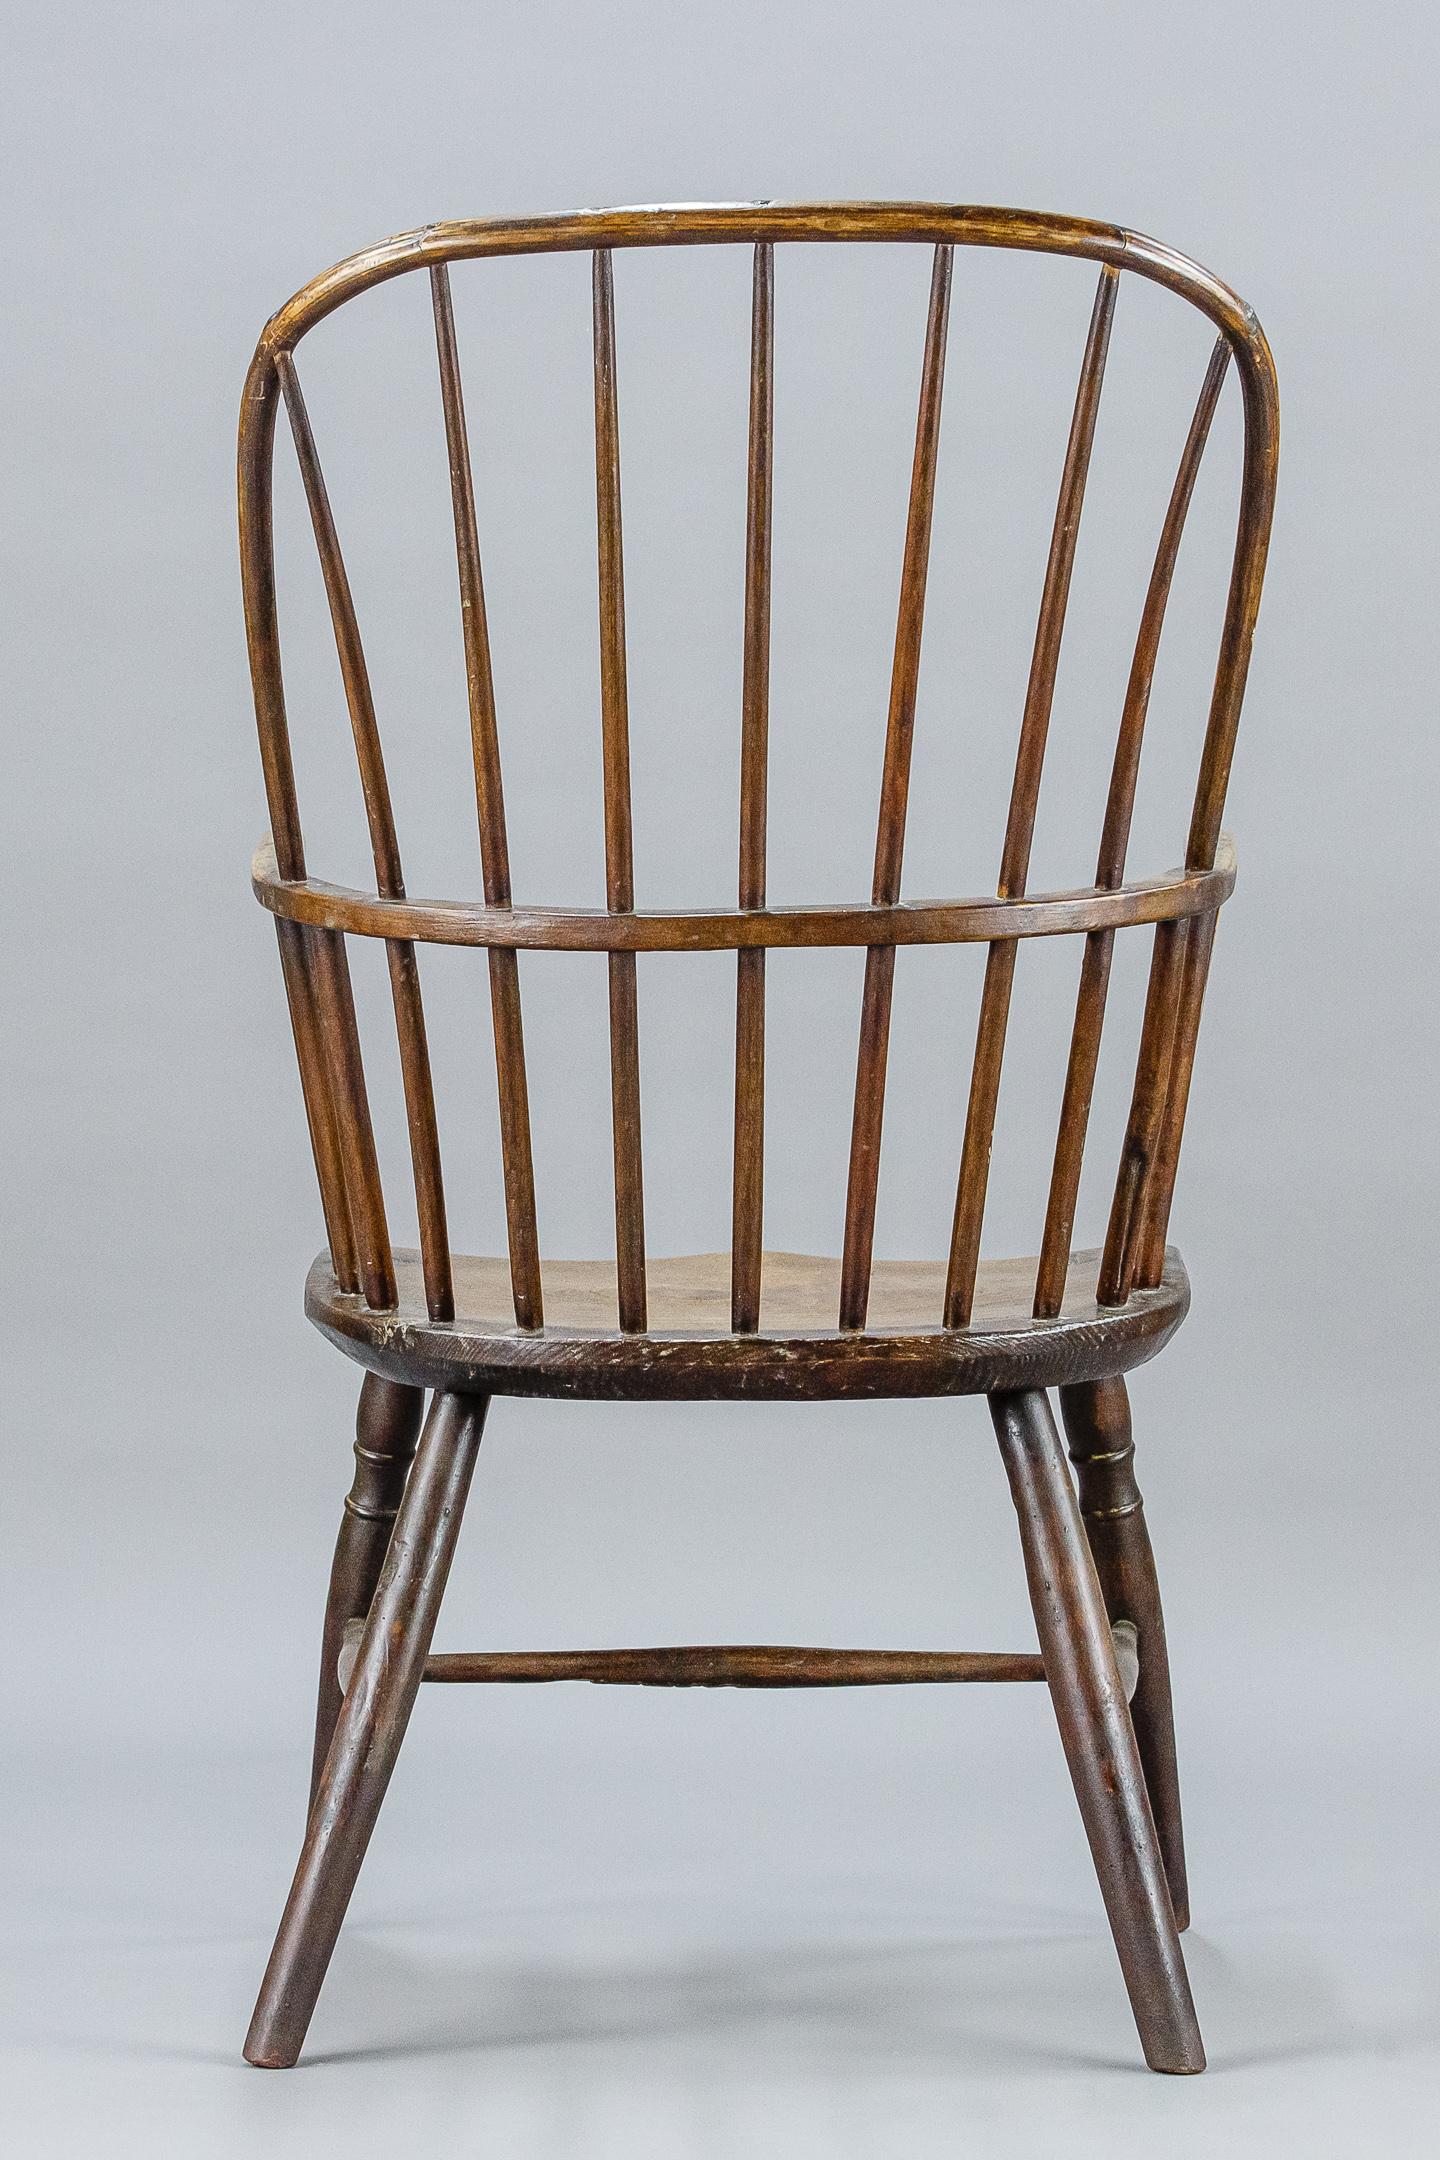 English Early 19th Century Country Hoop Back Windsor Chair 2